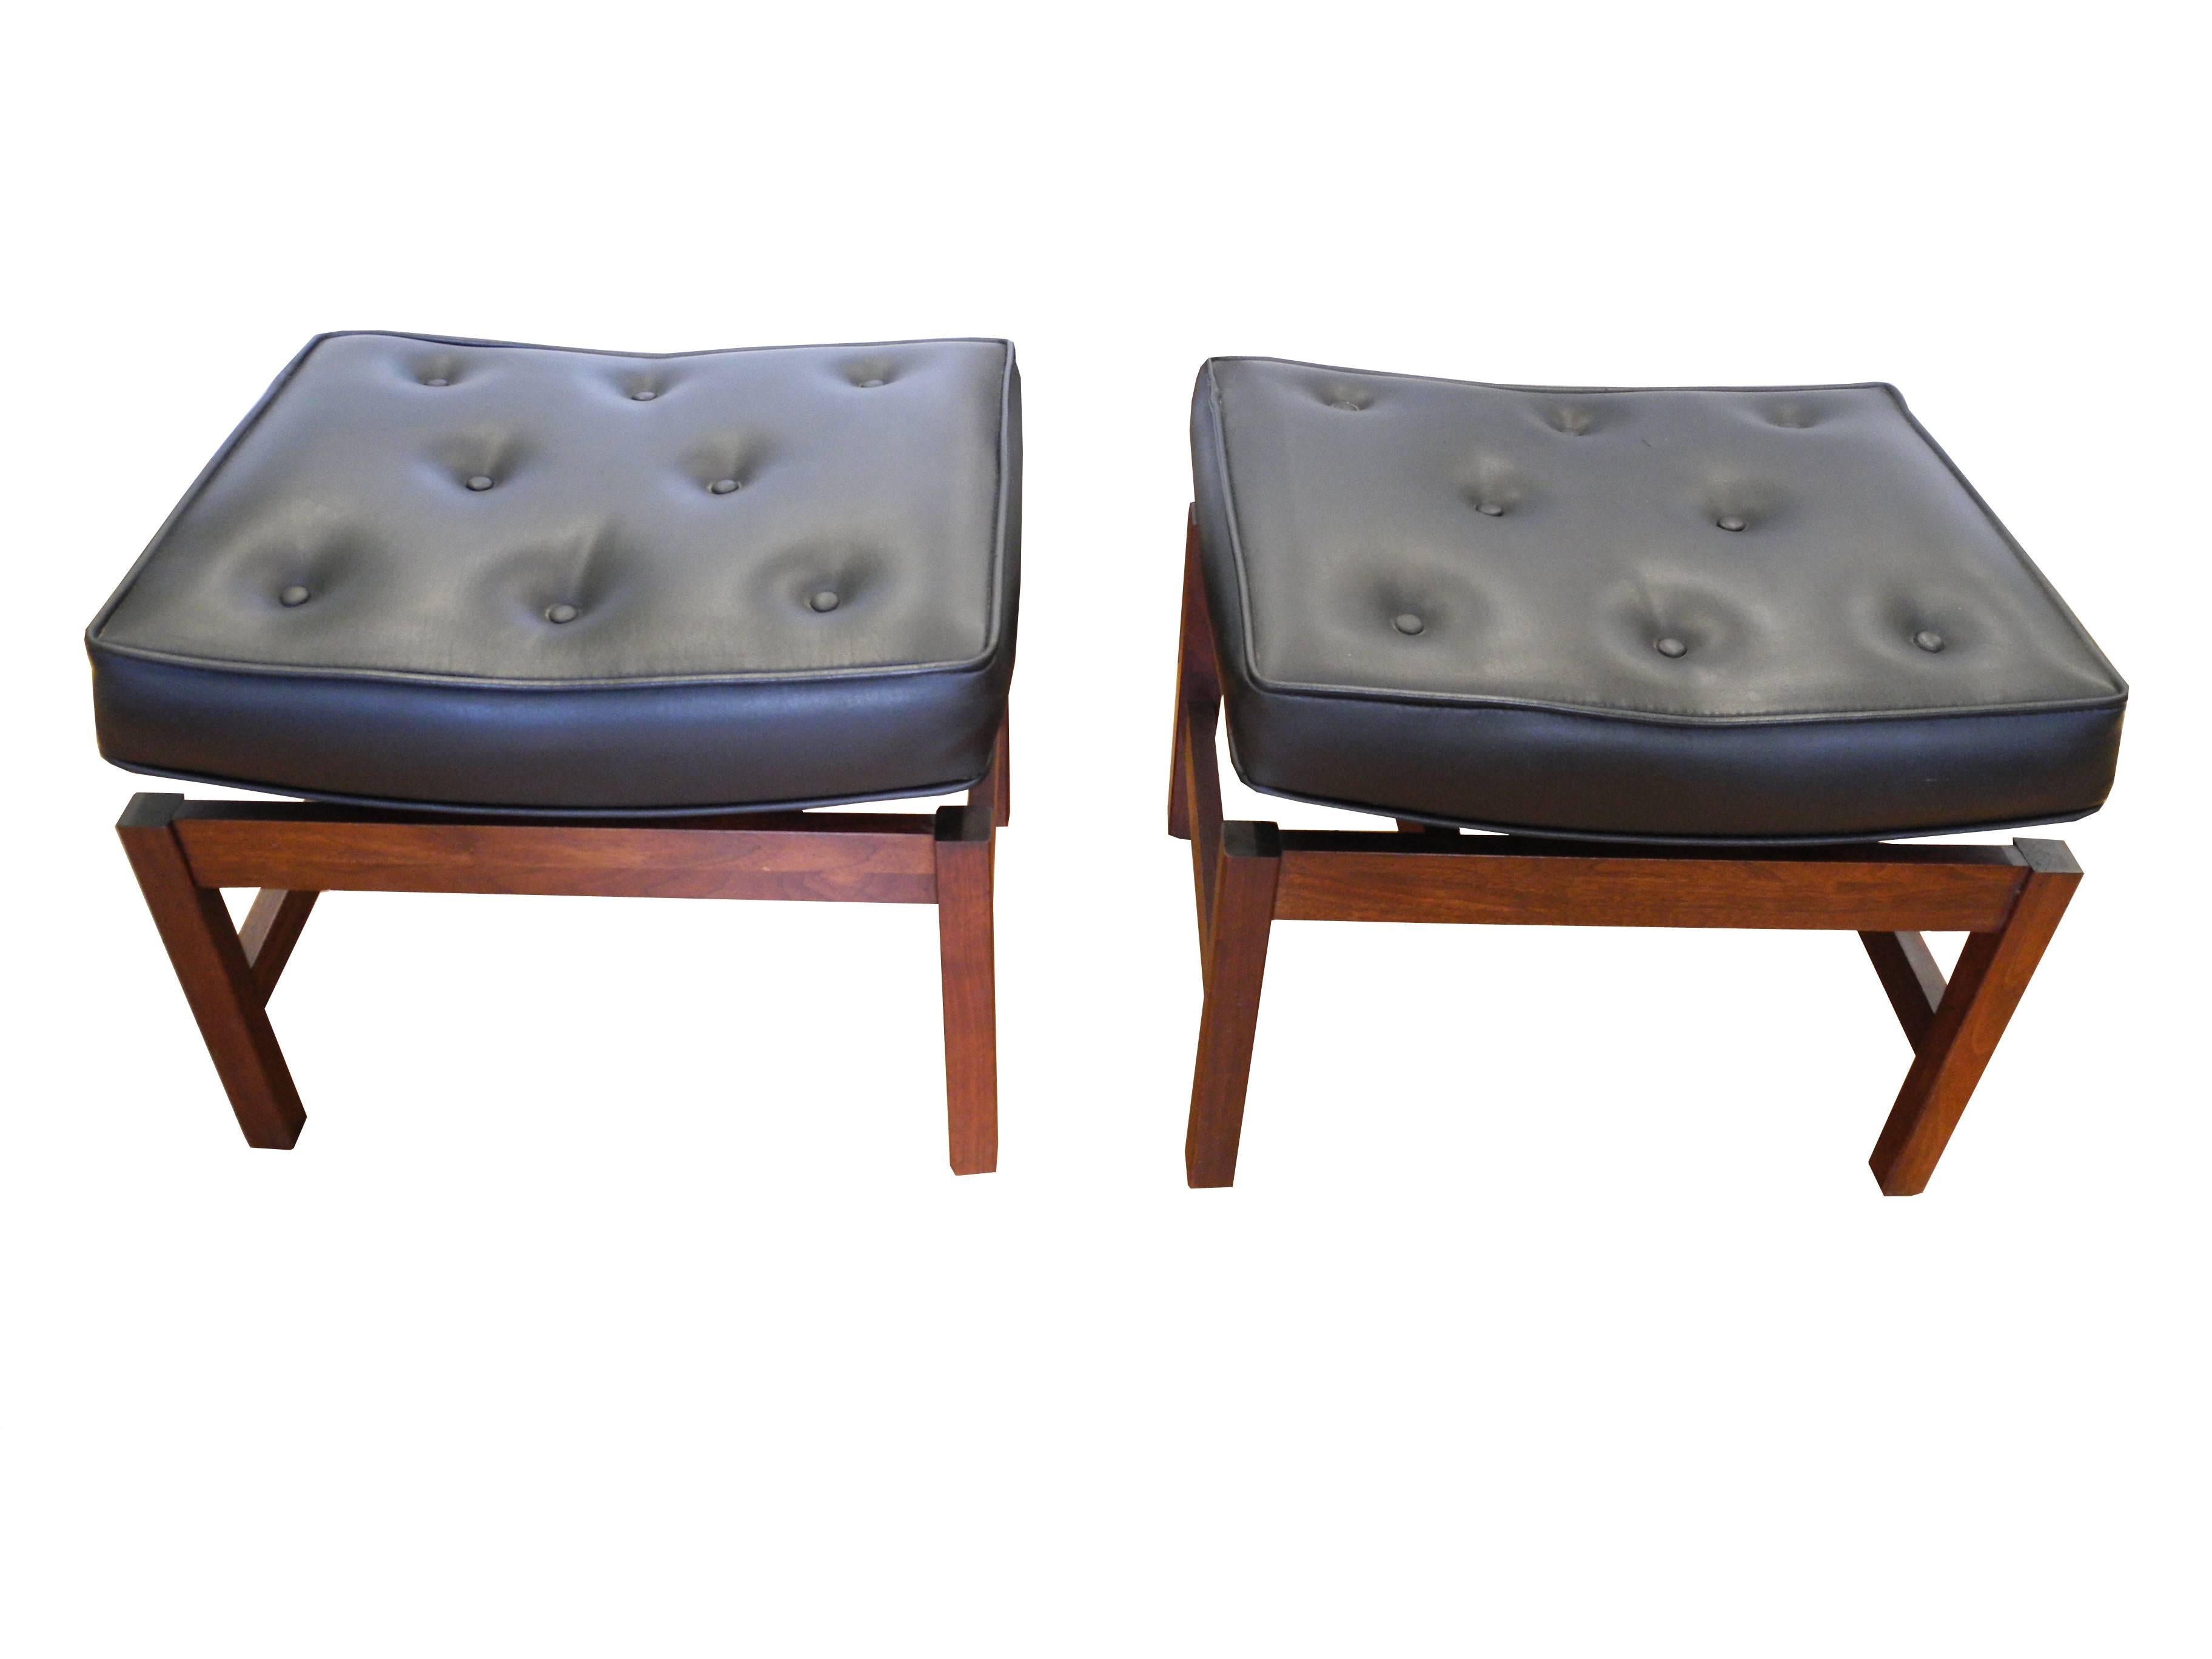 20th Century Danish Modern Vintage Ottoman and Console Set in Walnut Attributed to Jens Risom